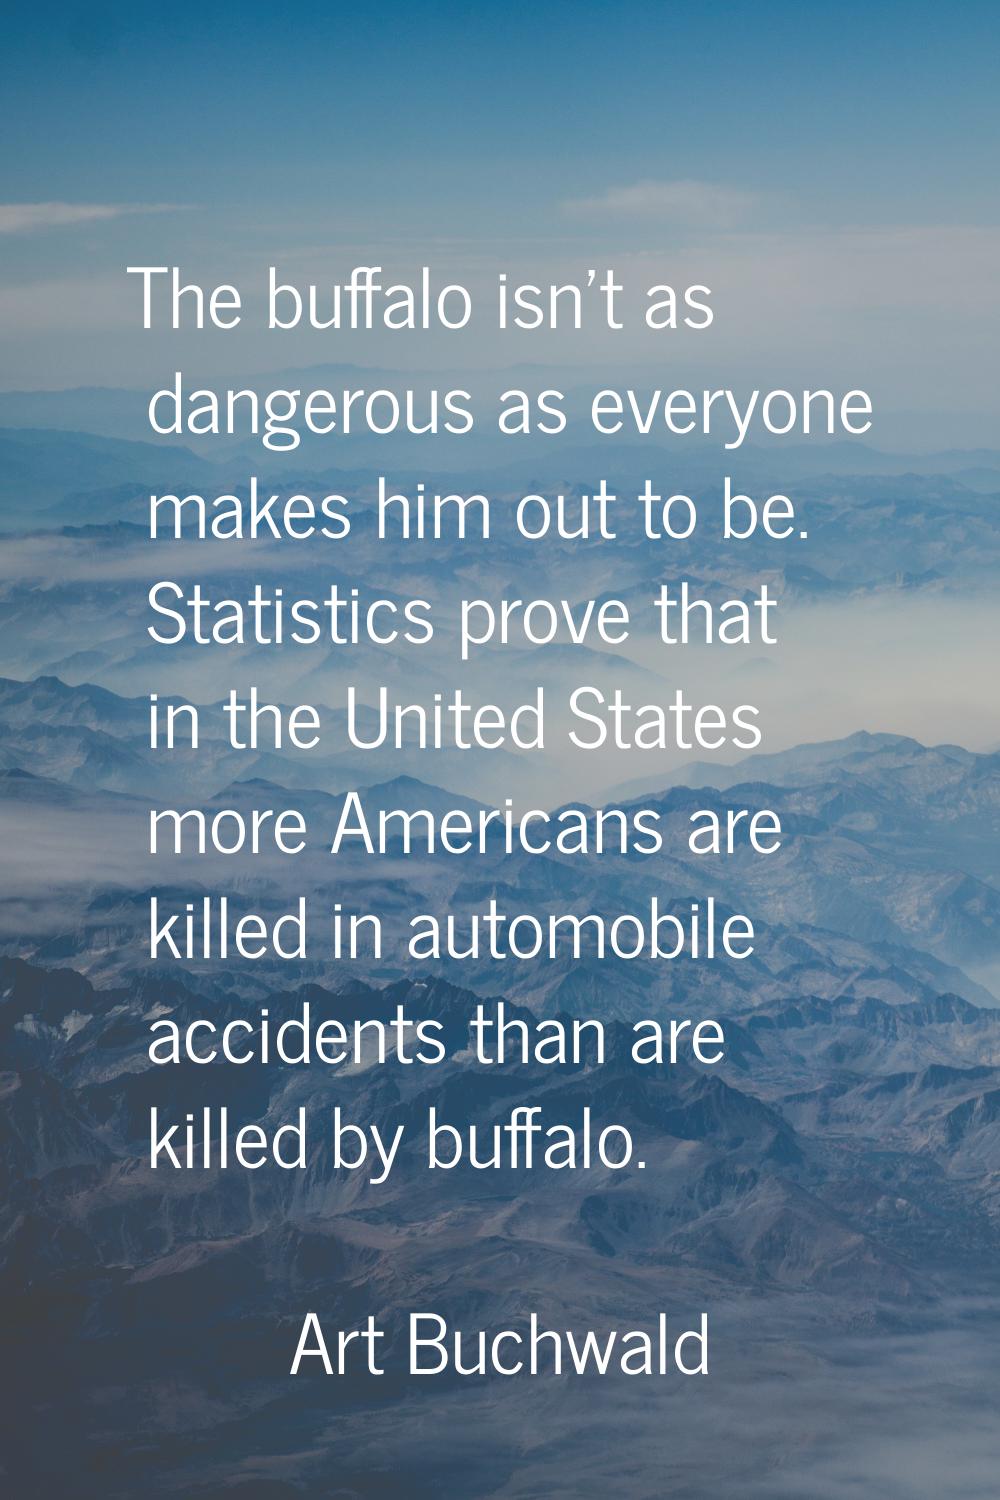 The buffalo isn't as dangerous as everyone makes him out to be. Statistics prove that in the United